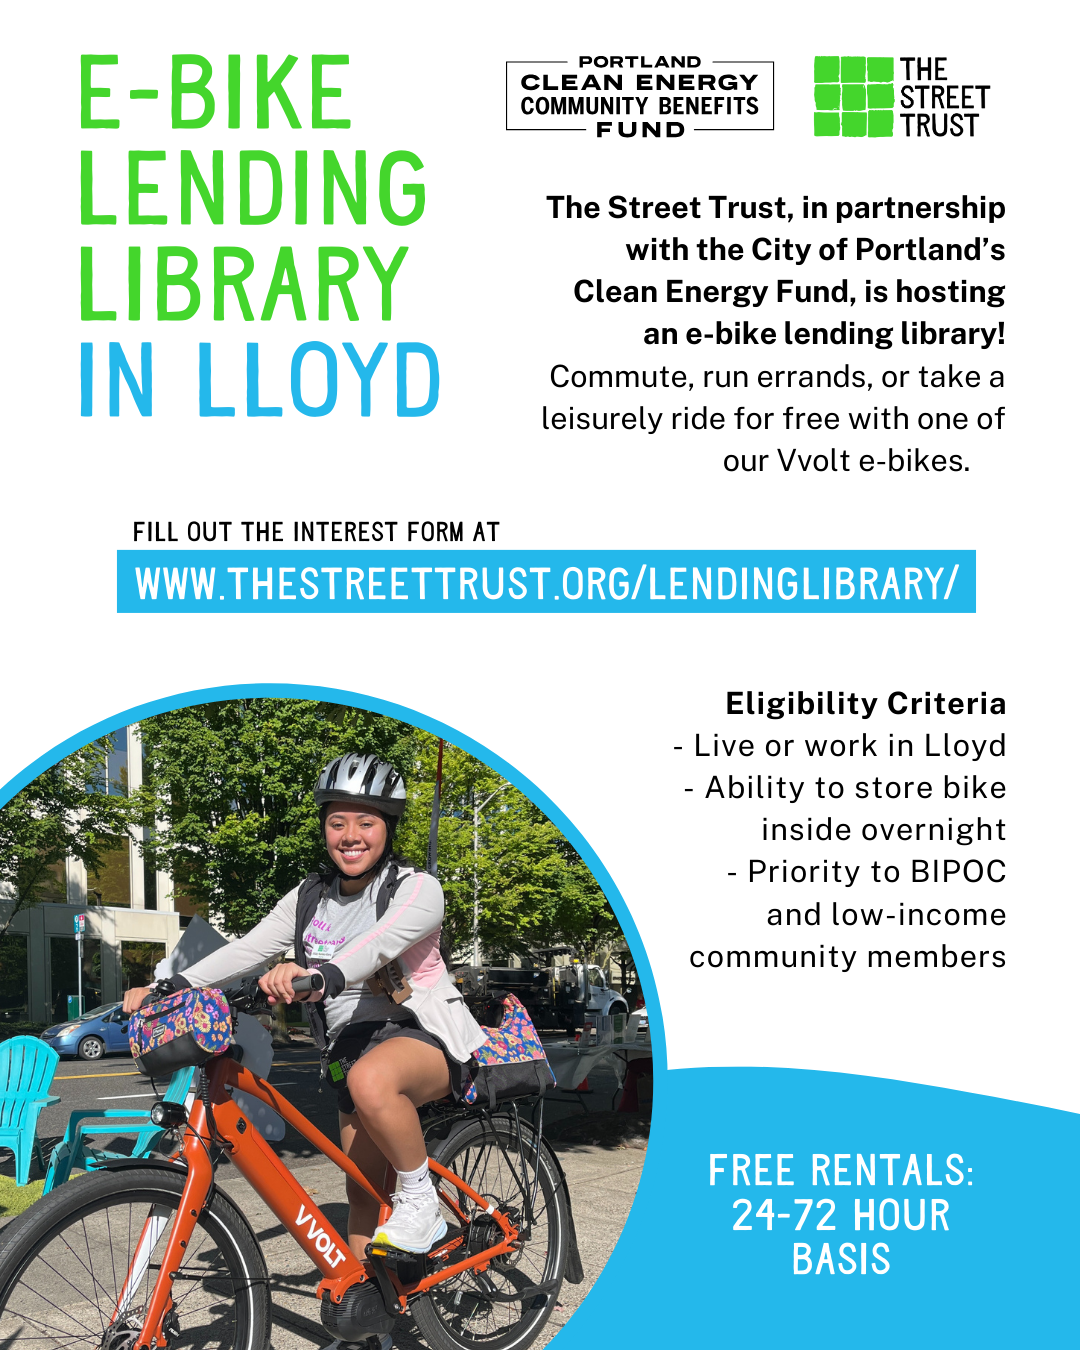 a flier featuring a woman riding an orange e-bike and the "E-Bike Lending Library in Lloyd" and the "Street Trust, in partnership with the City of Portland's Clean Energy Fund, is hosting an e-bike lending library! Commute, run errands, or take a leisurely ride for free with one of our Vvolt e-bikes"